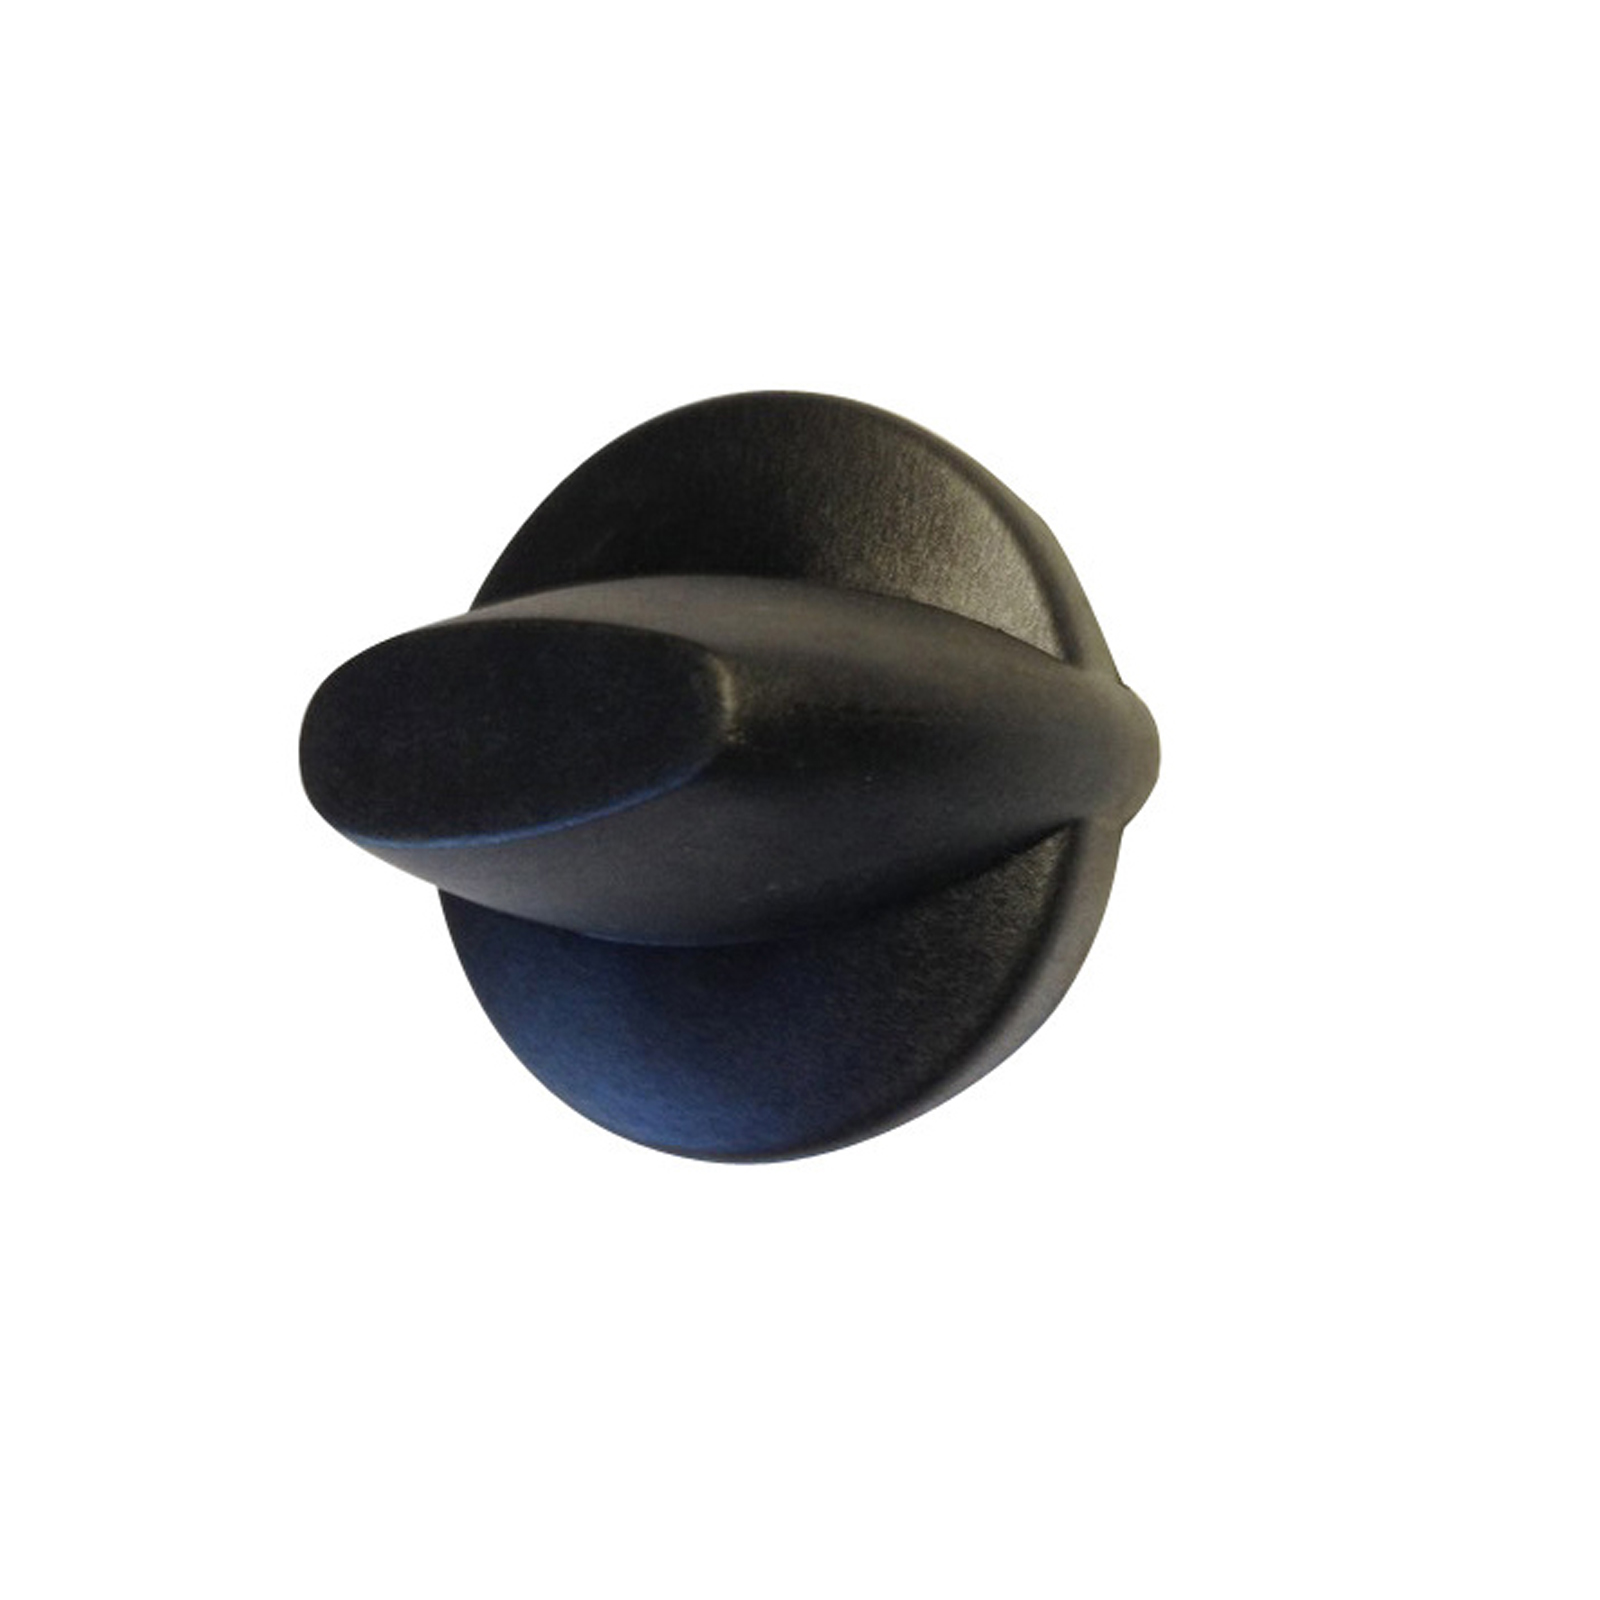 New BeefEater Clubman Knob 95256